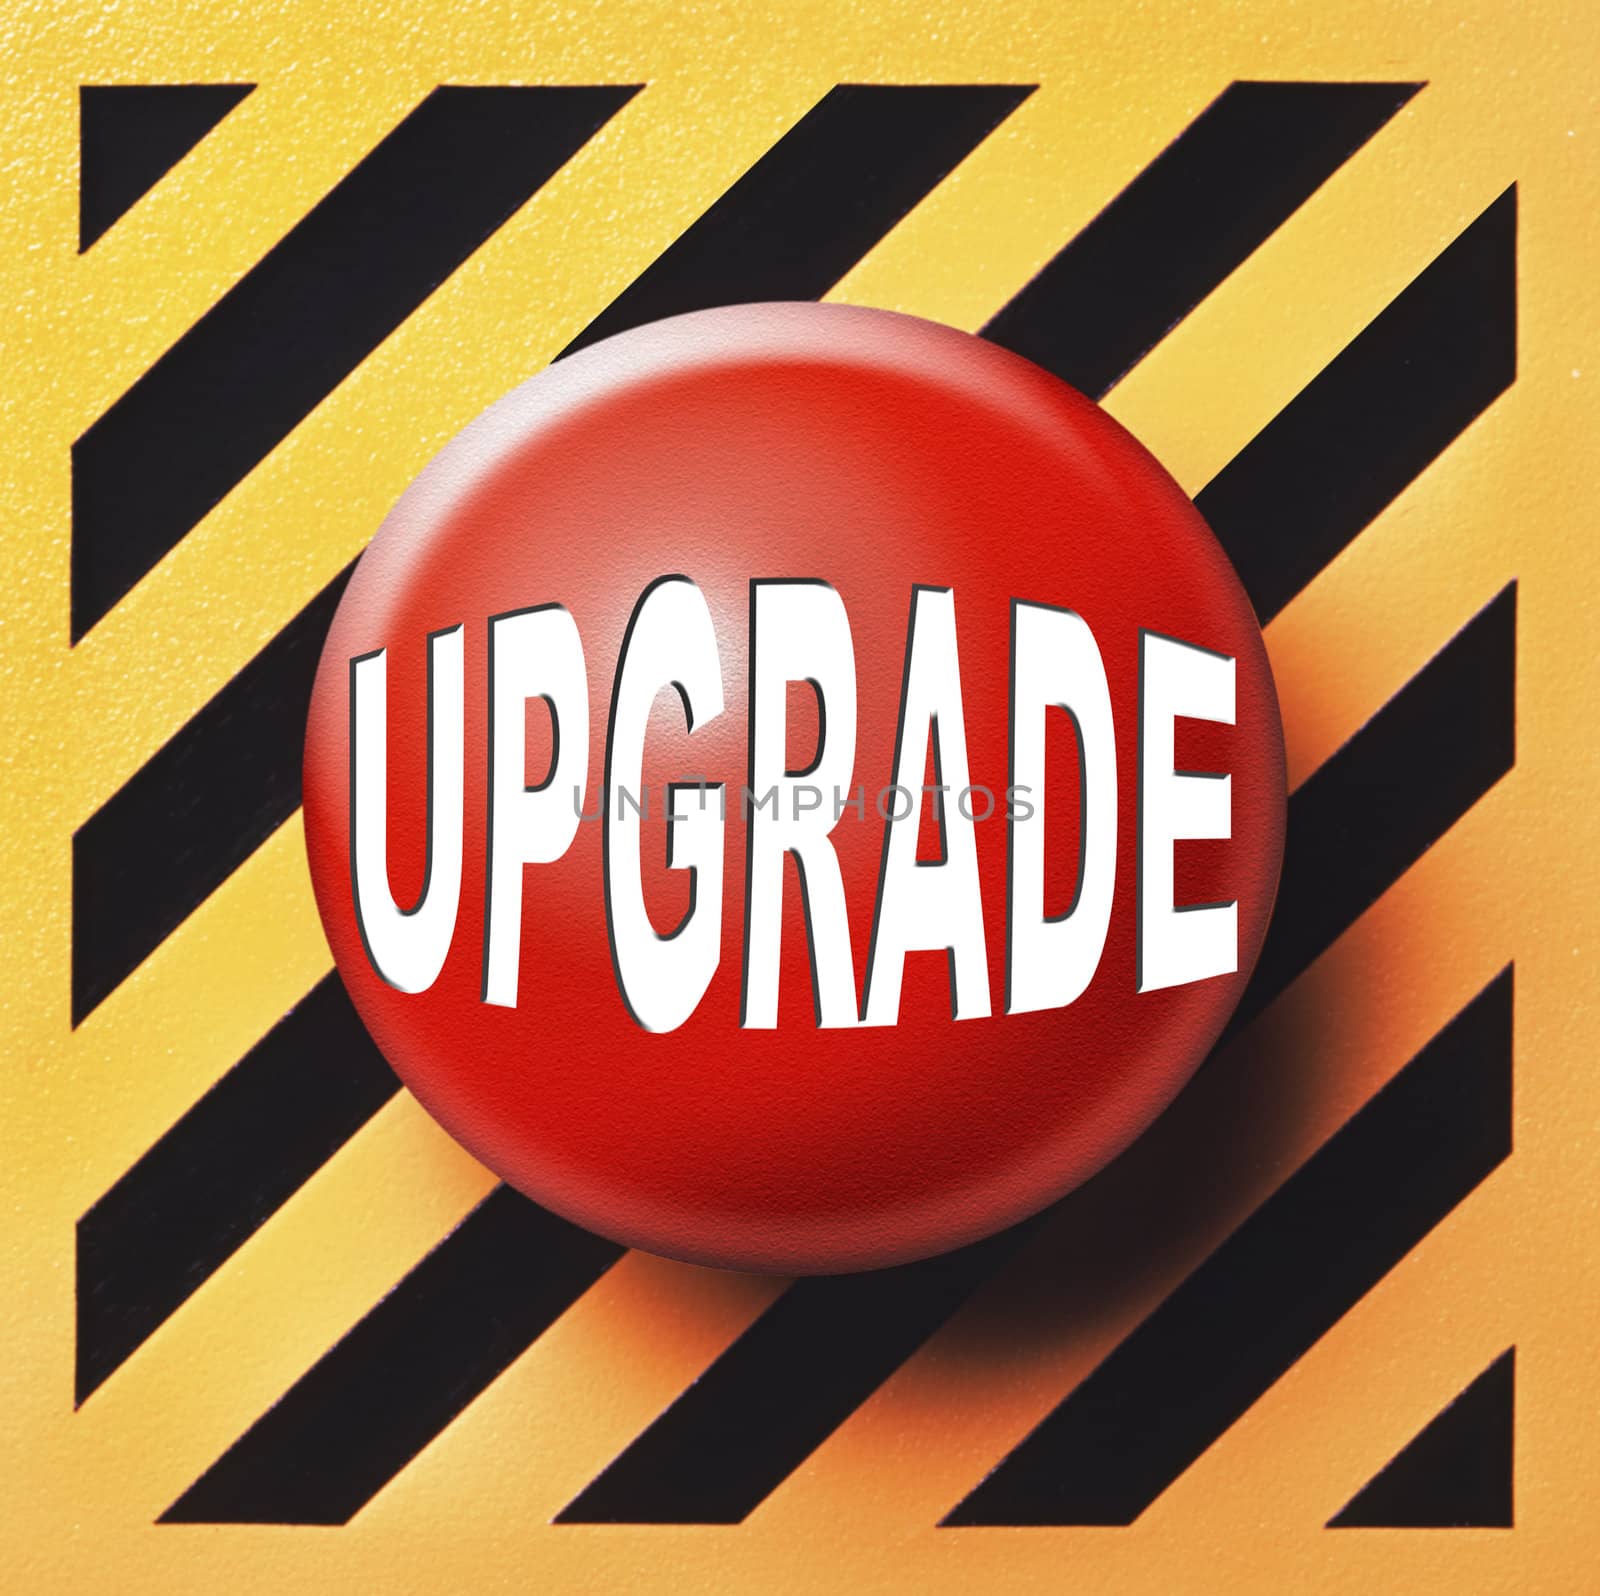 Upgrade button by f/2sumicron